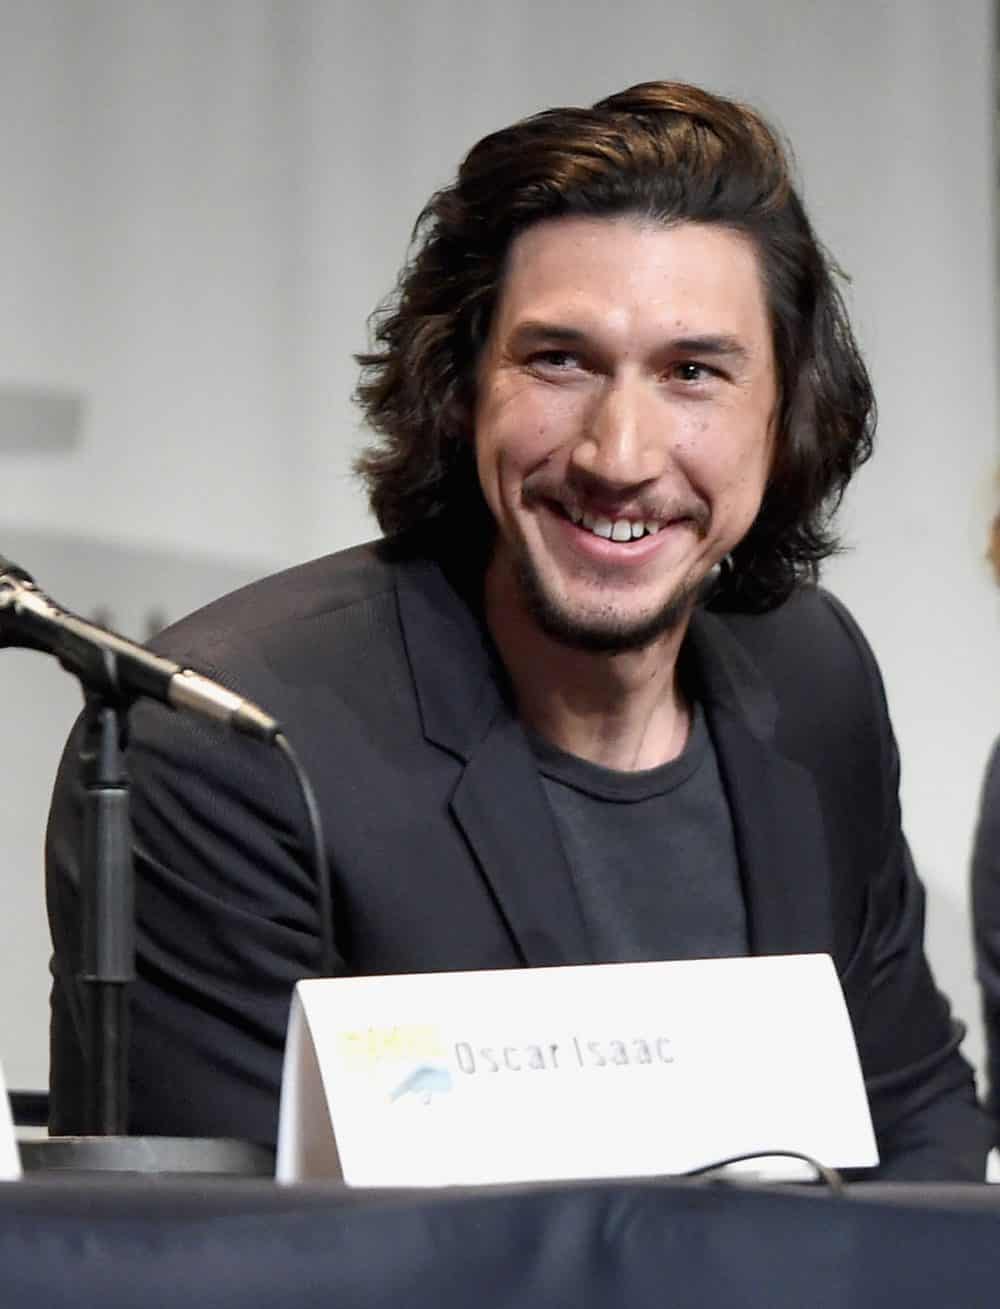 SAN DIEGO, CA - JULY 10: Actor Adam Driver at the Hall H Panel for Star Wars: The Force Awakens during Comic-Con International 2015 at the San Diego Convention Center on July 10, 2015 in San Diego, California. (Photo by Michael Buckner/Getty Images for Disney) *** Local Caption *** Adam Driver